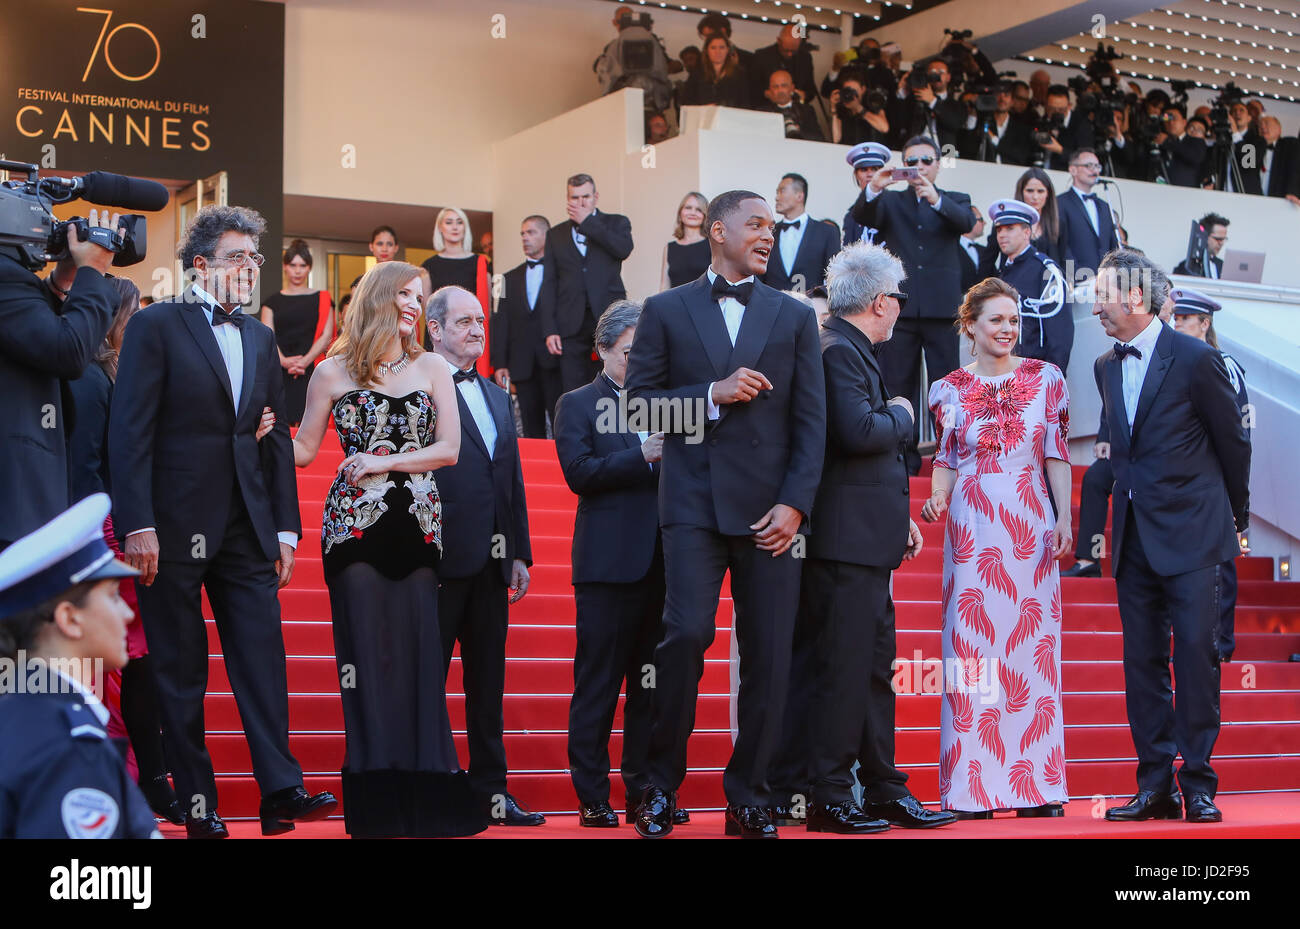 70th Cannes Film Festival - Gala Opening - 'Ismael's Ghosts' red carpet  Featuring: Gabriel Yared, Jessica Chastain, Will Smith, Pedro Almodovar, Maren Ade, Paolo Sorrentino Where: Cannes, France When: 17 May 2017 Credit: WENN.com Stock Photo